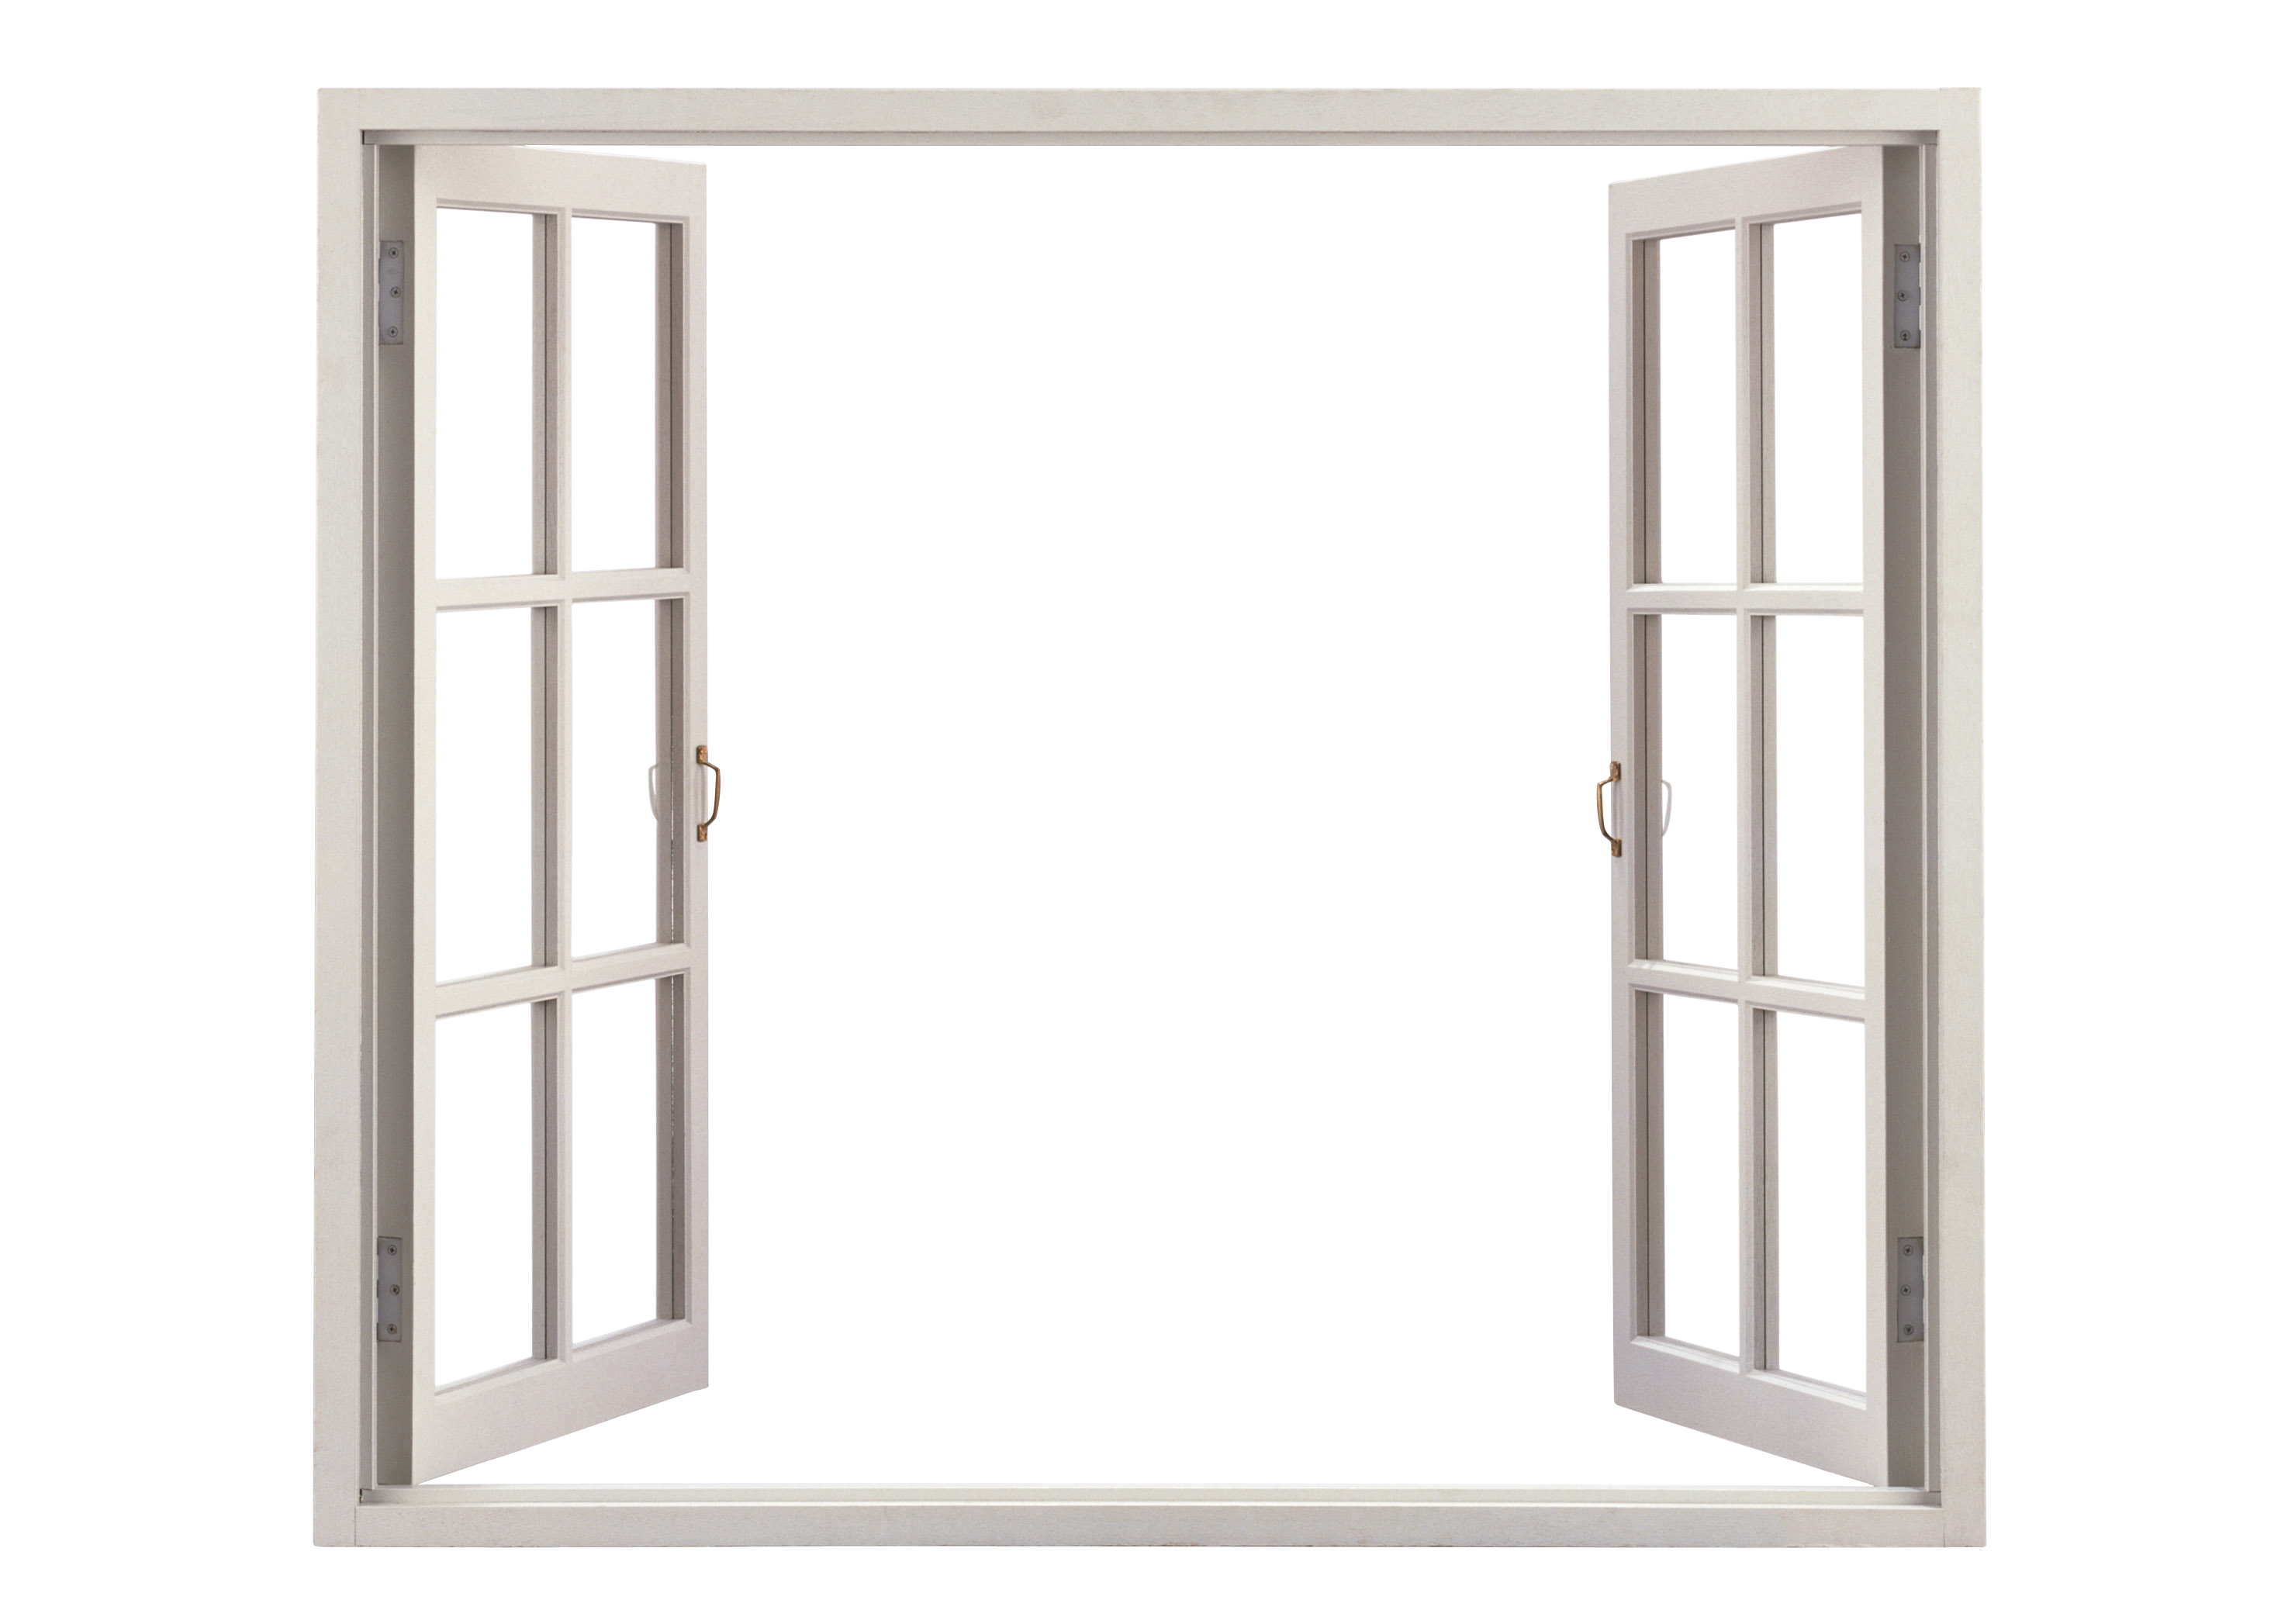 White clipart window frame. The wounded inner child